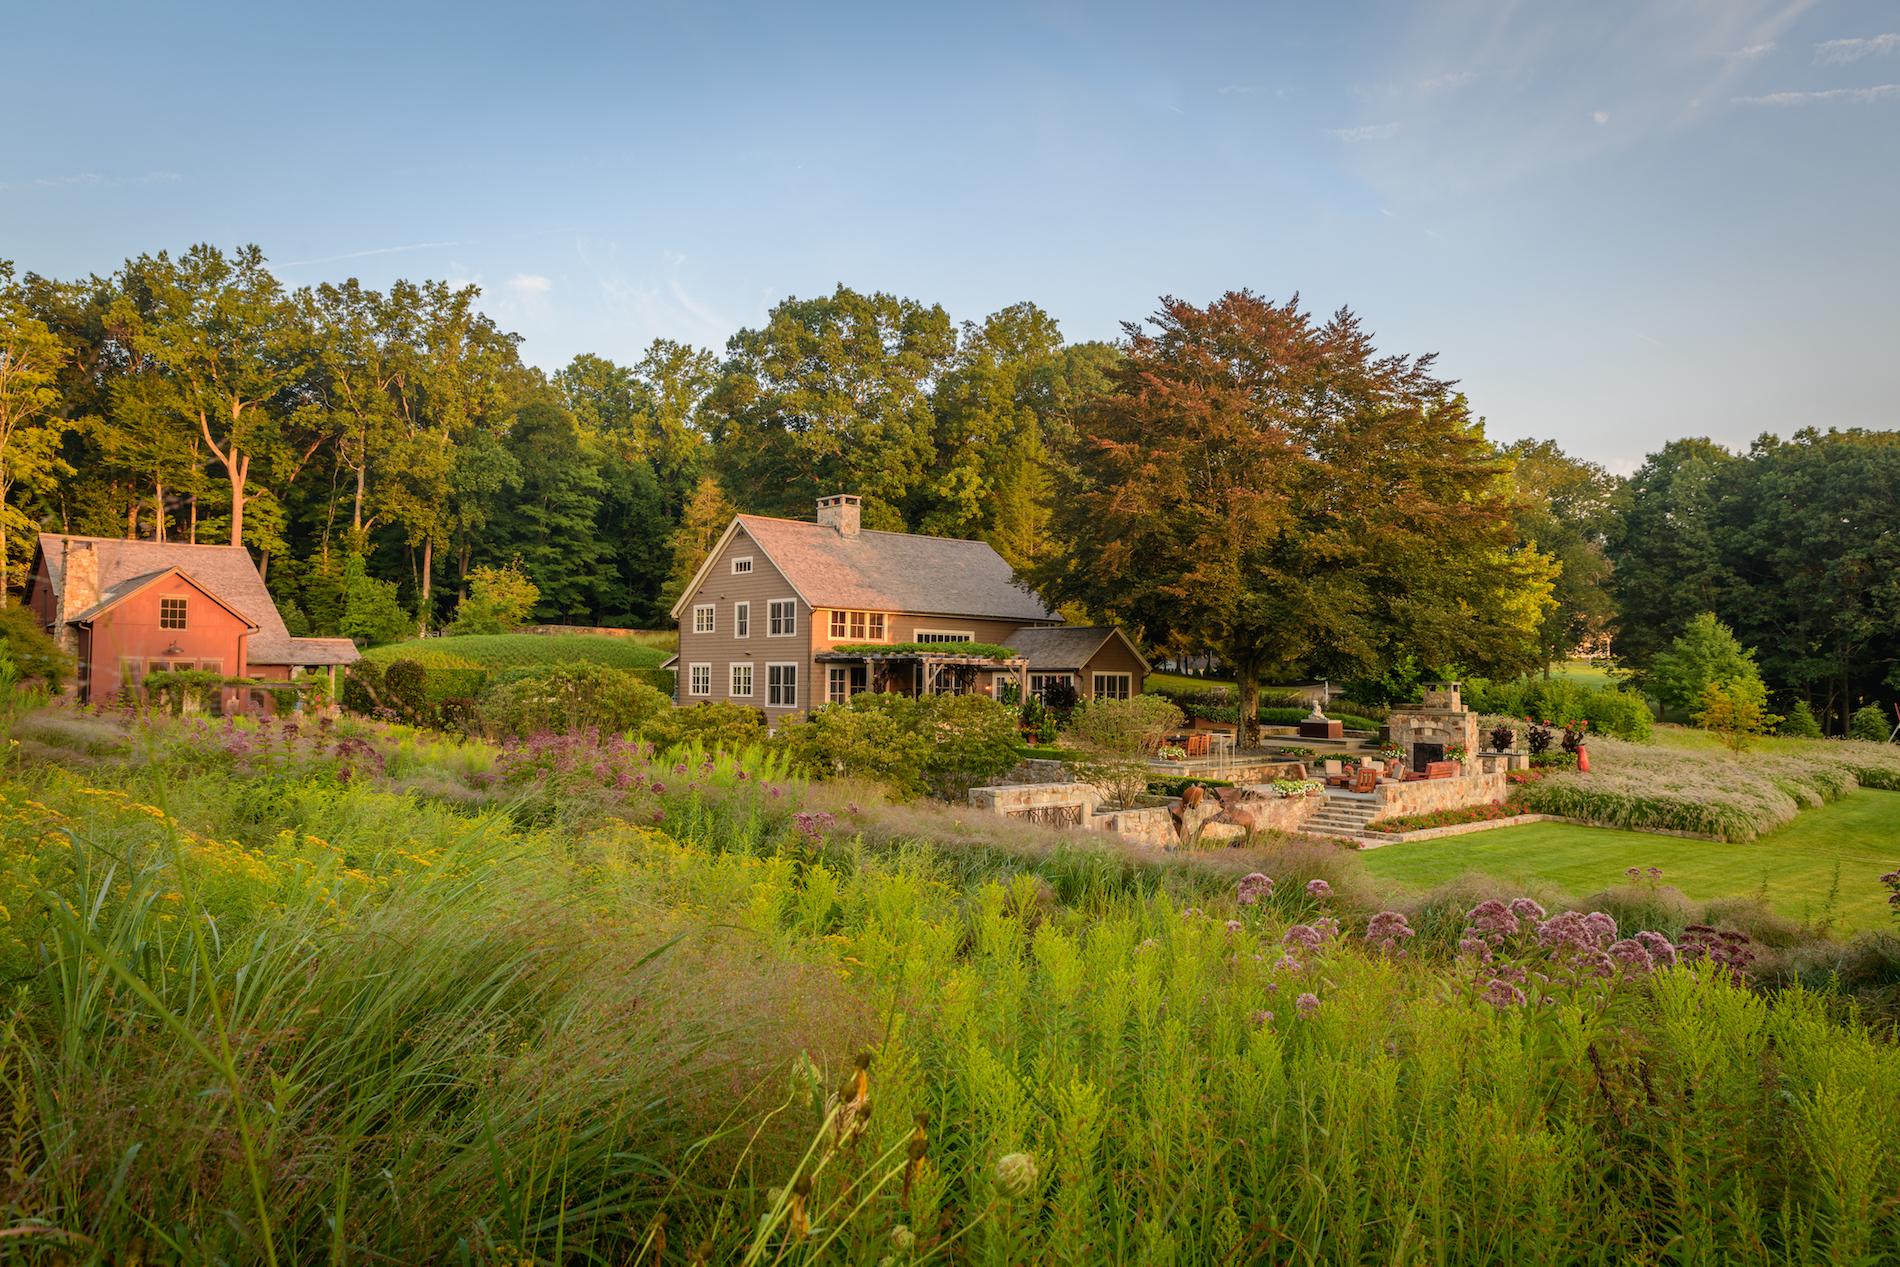 This Connecticut Property Is Enveloped By a Dreamlike Garden Oasis 